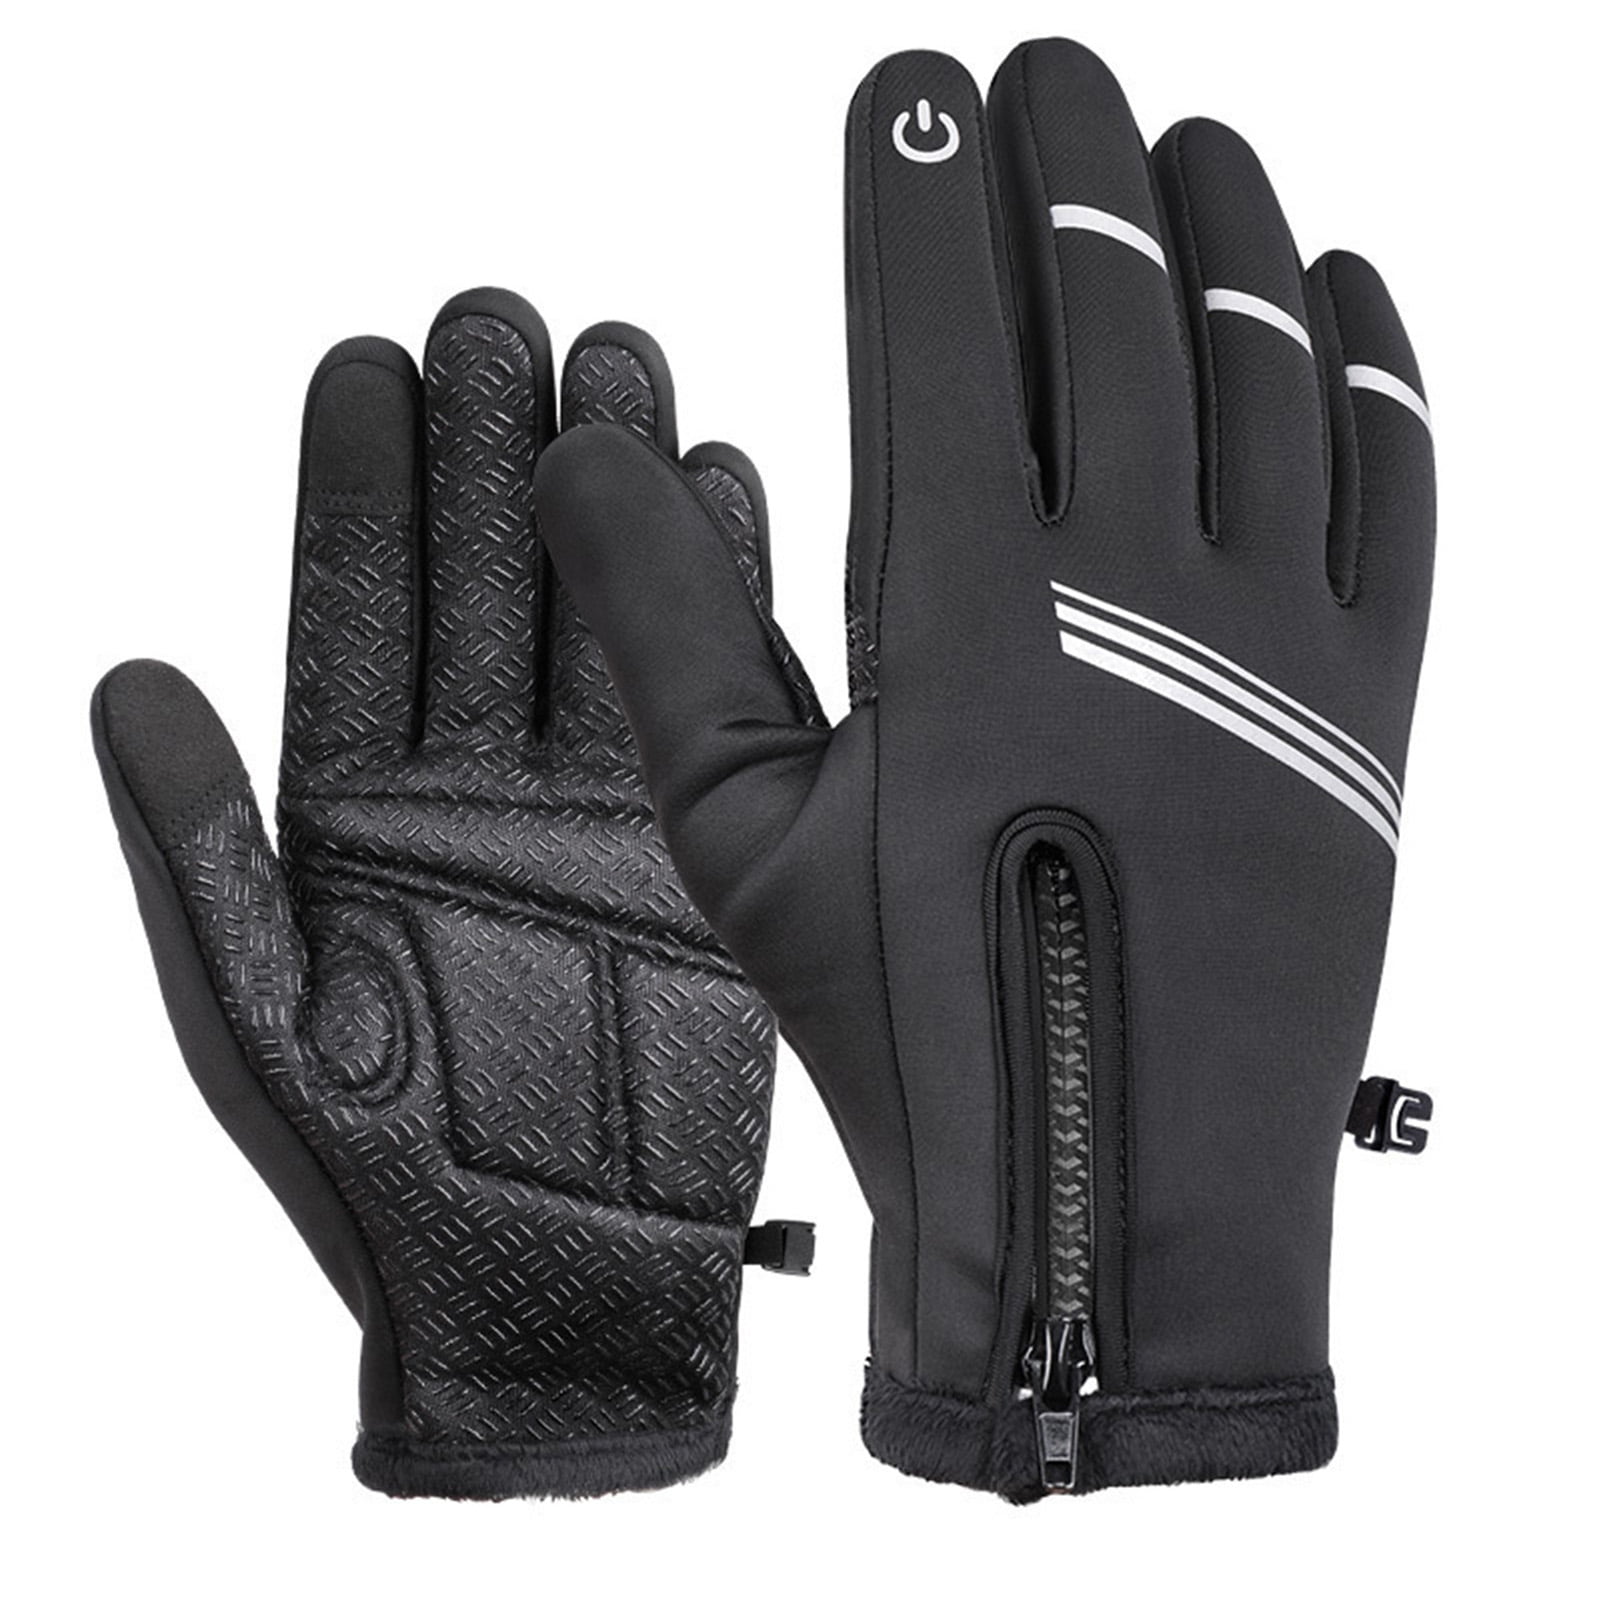 Black Riders Trend Embossed Synthetic PU Riding Gloves Large New Thinsulate 